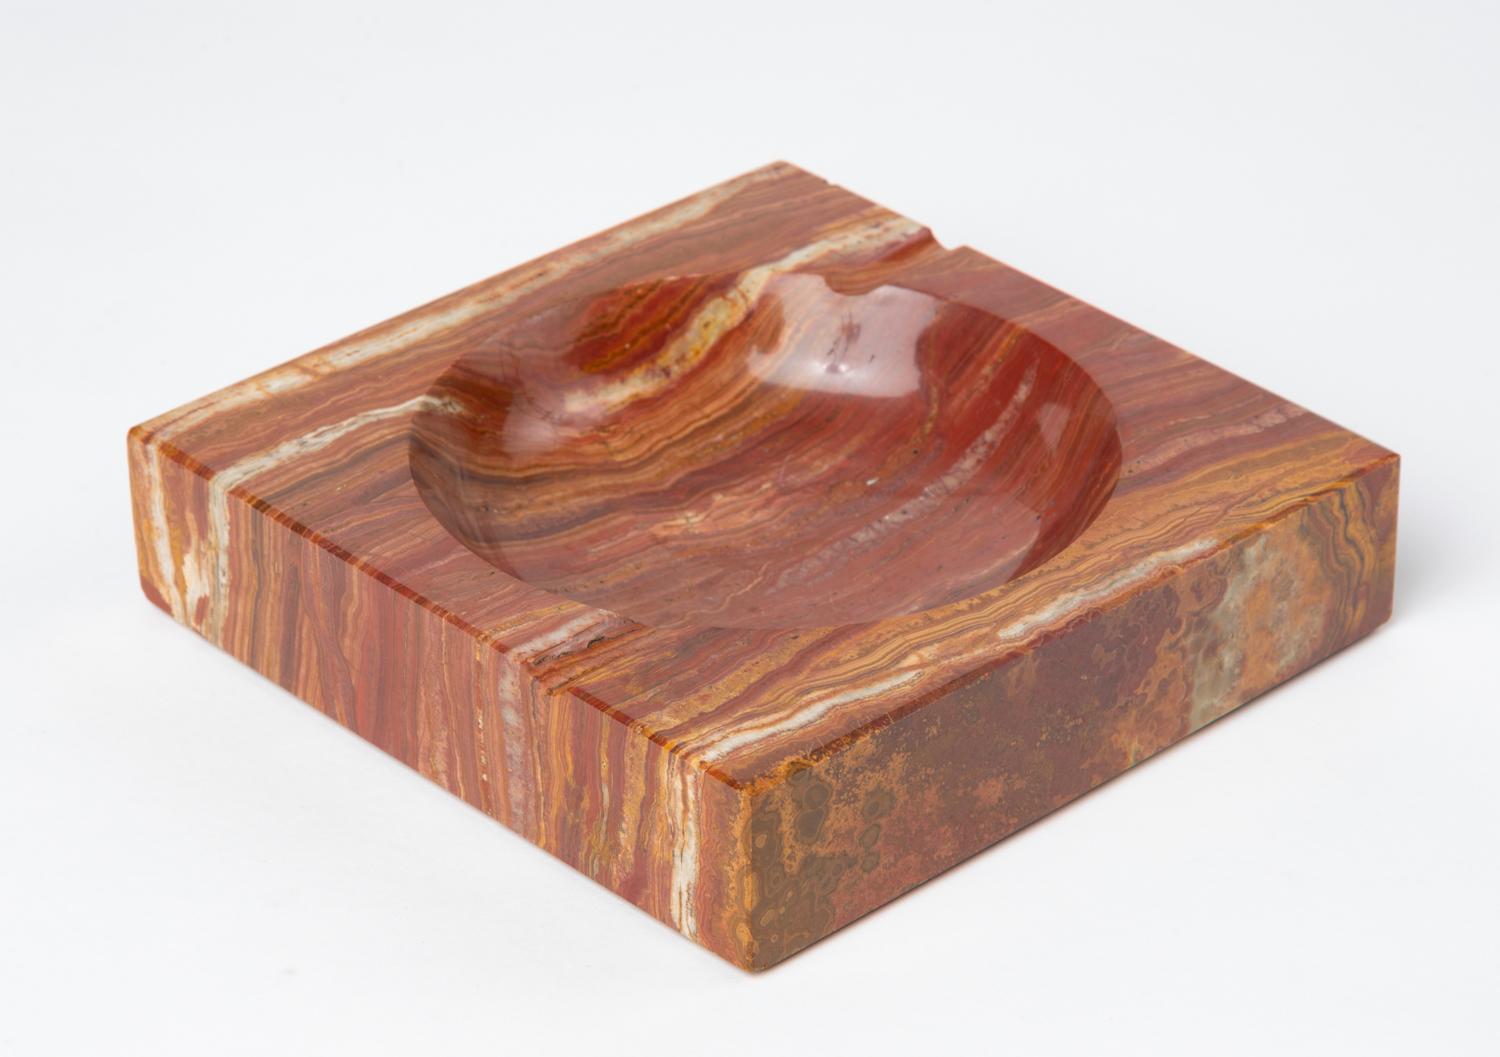 Post-Modern Vintage Square Ashtray in Red Onyx